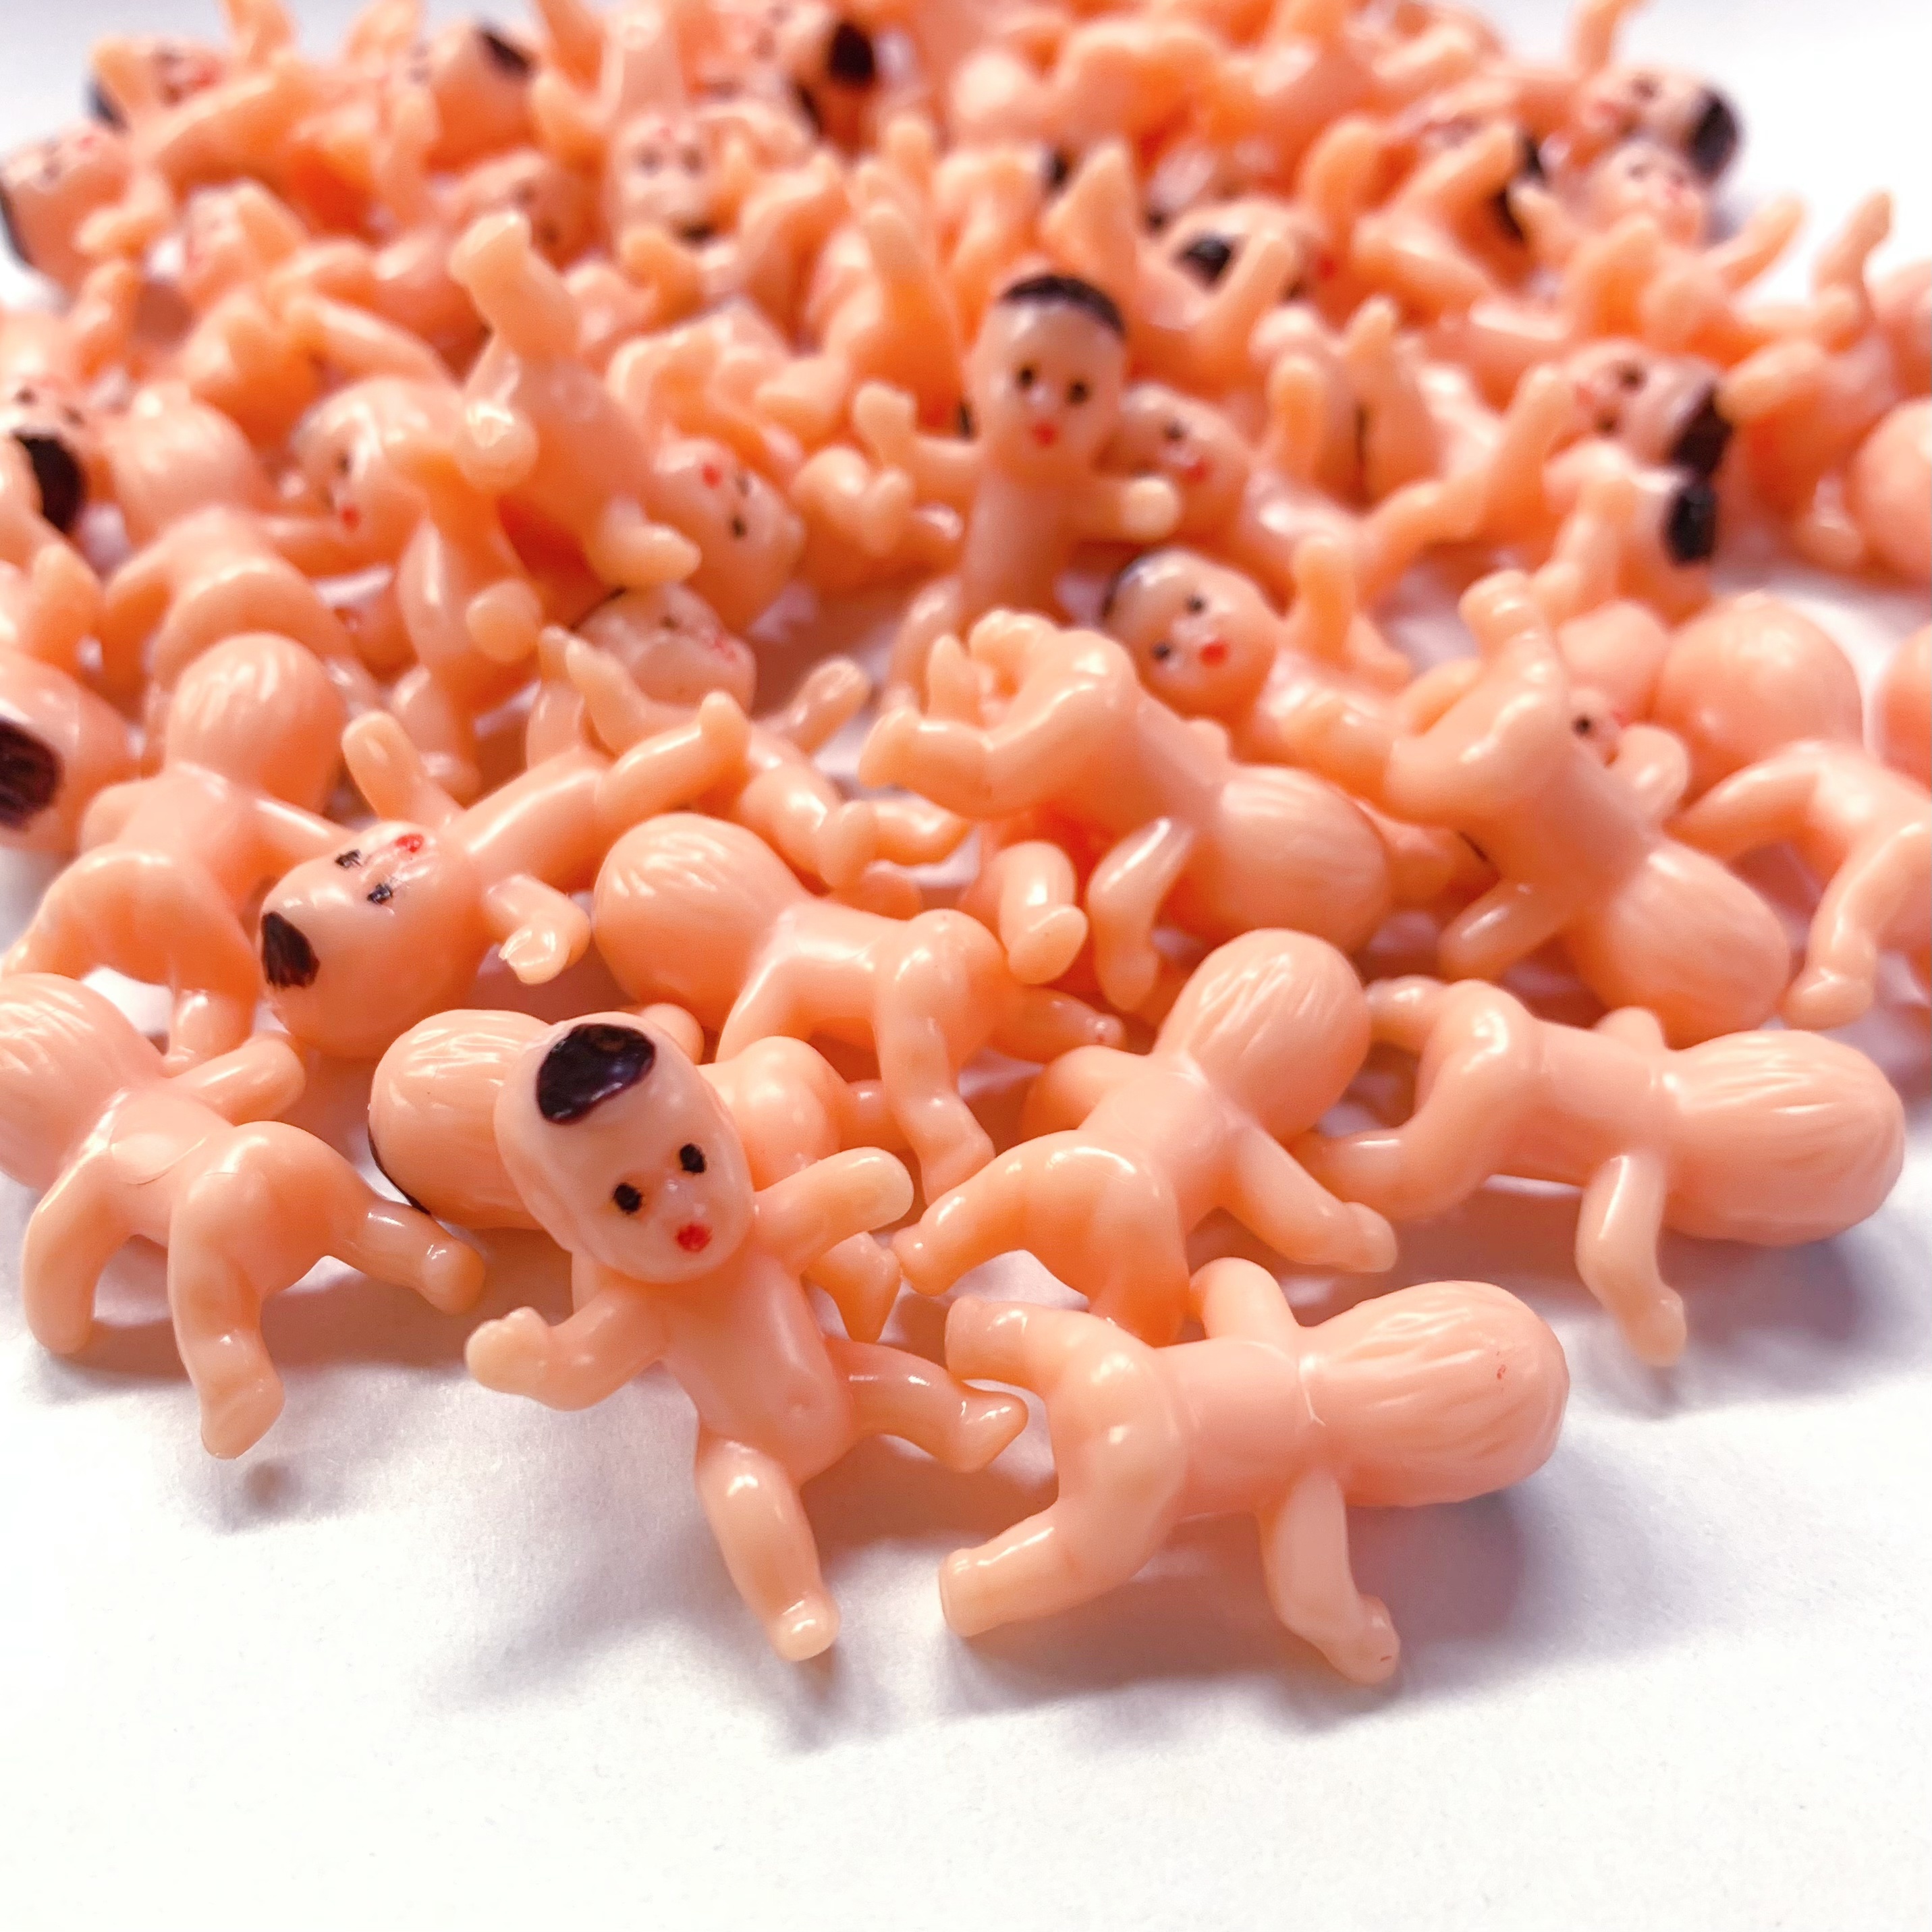 Mini Plastic Babies, Selizo 200pcs Tiny Plastic Baby Figurines Small King  Cake Babies Bulk for Ice Cube My Water Broke Baby Shower Games (10 Colors)  10 Colors 200 Pieces